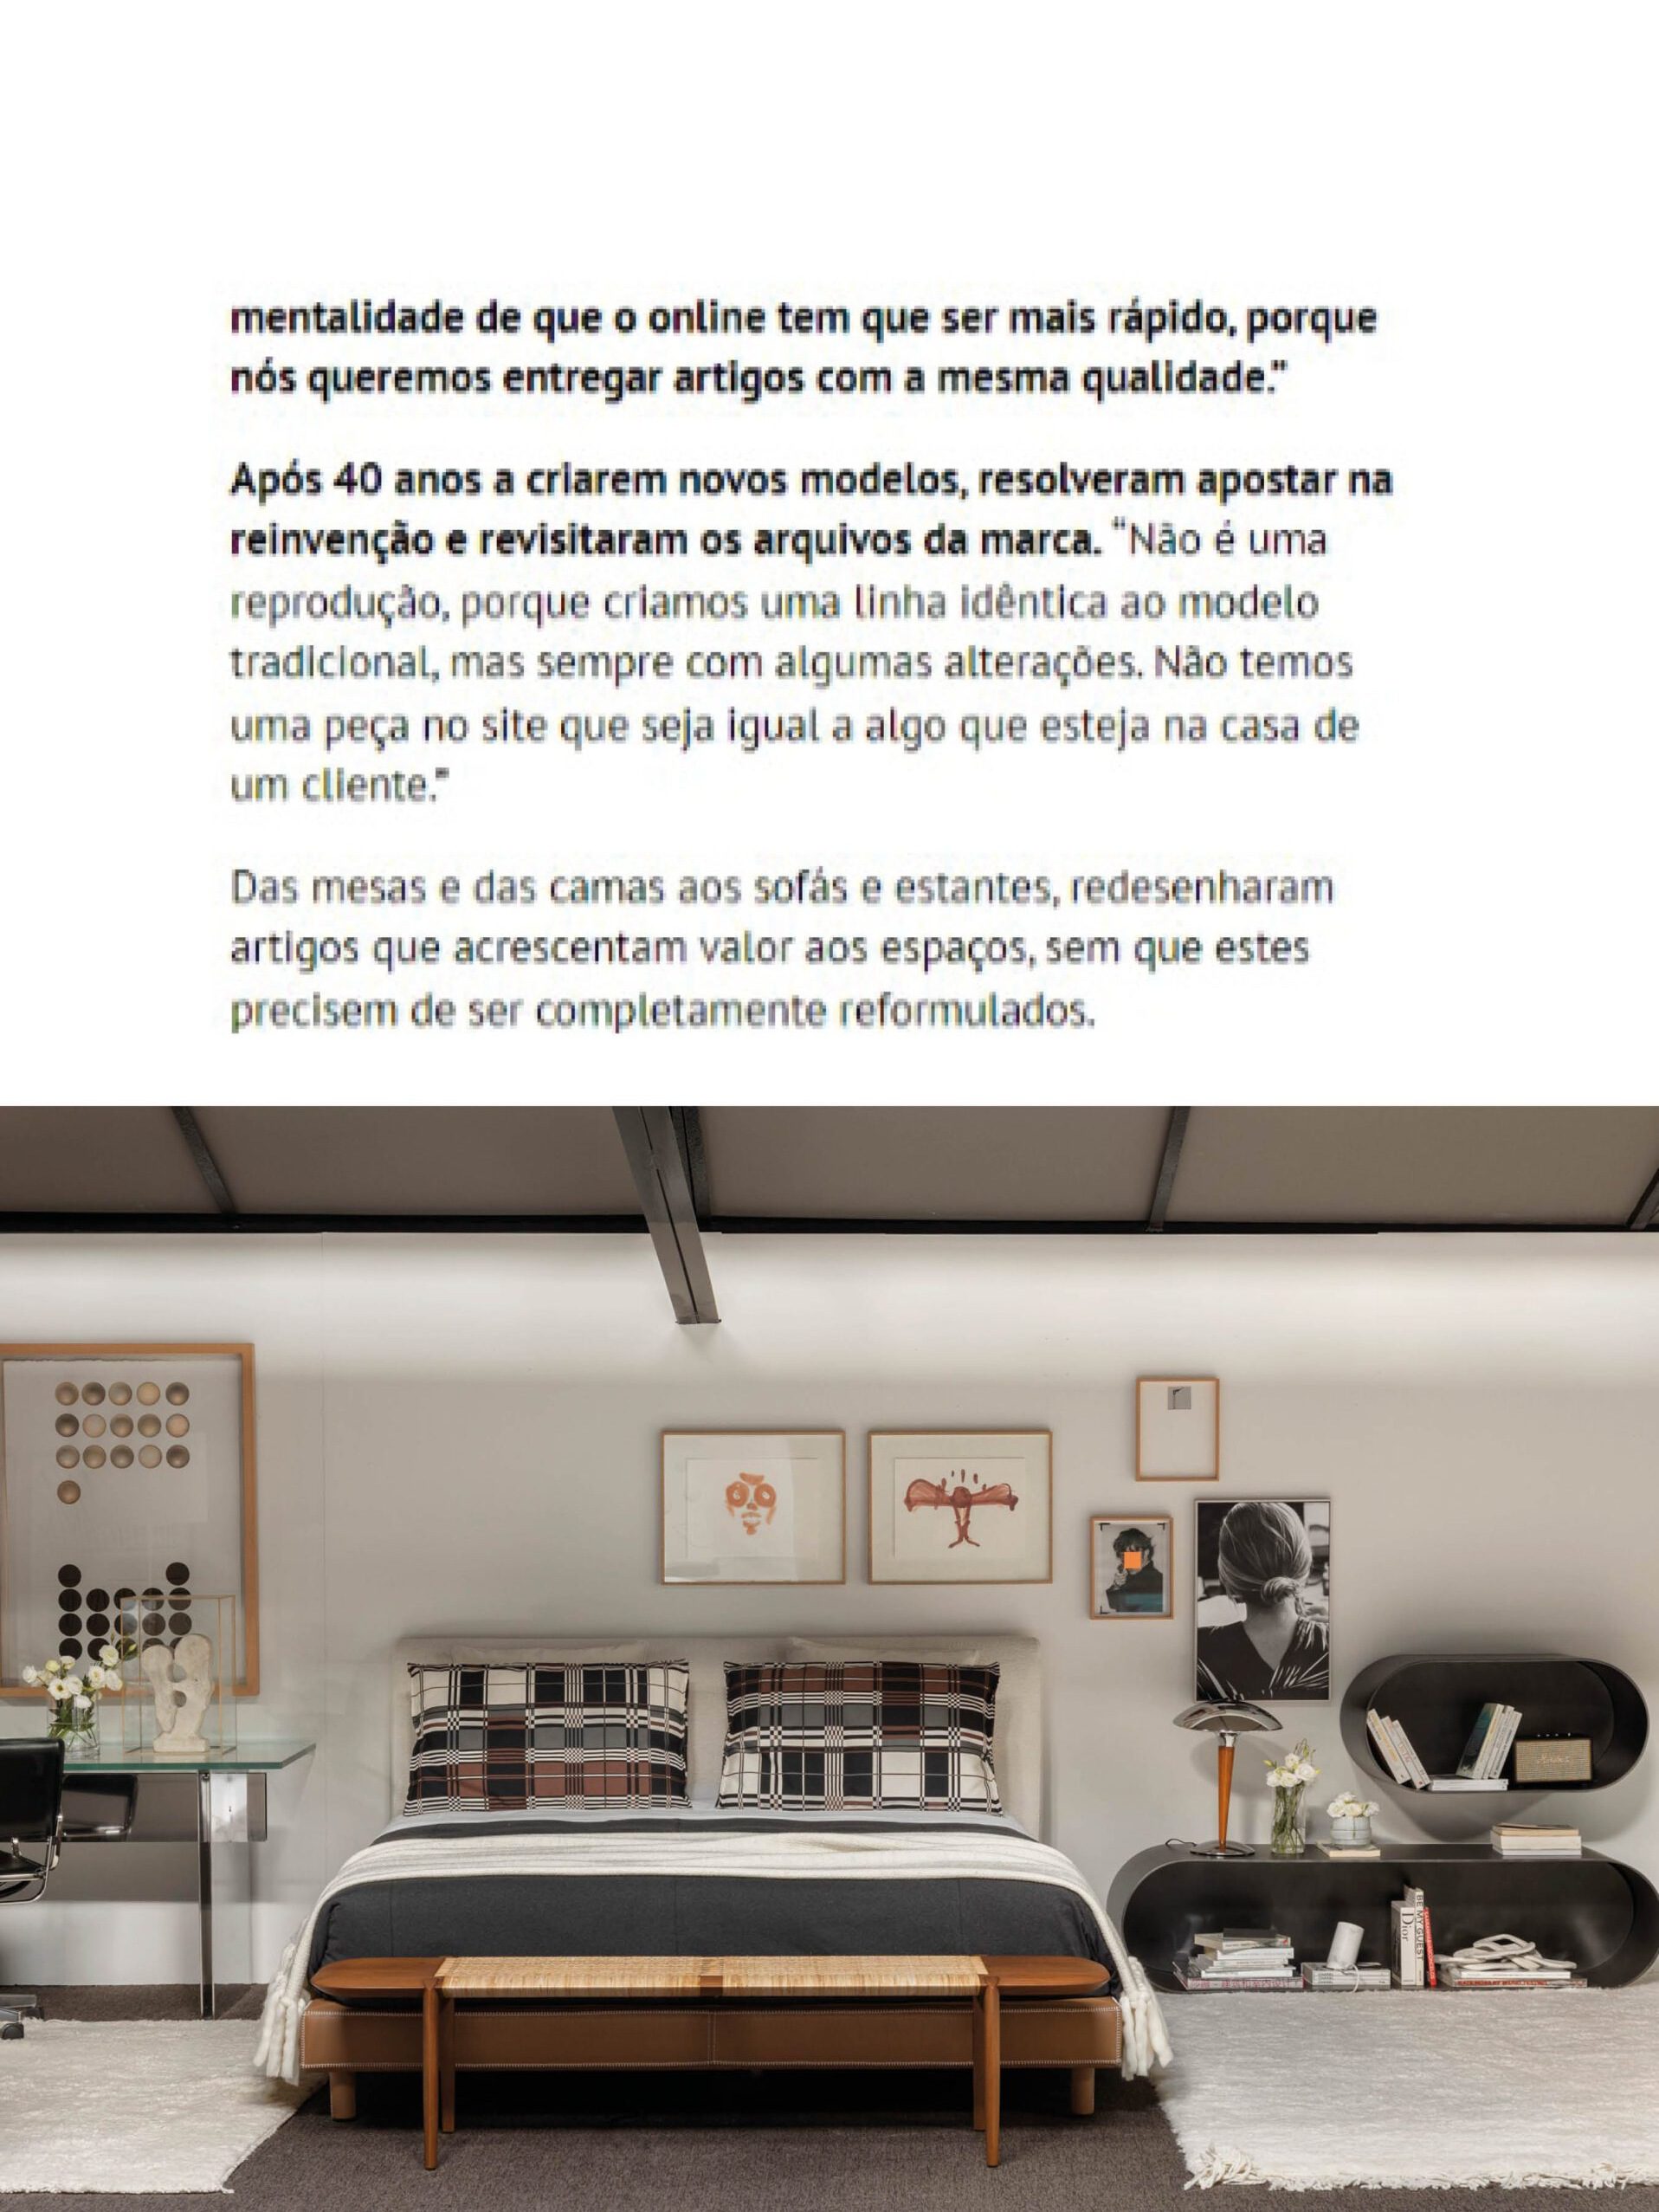 SAV nit november review design architecture project luxury interview showroom deco opened in 1985 project yellow online shop partners rosário tello carmo aranha 40 pieces furniture collection lifestyle